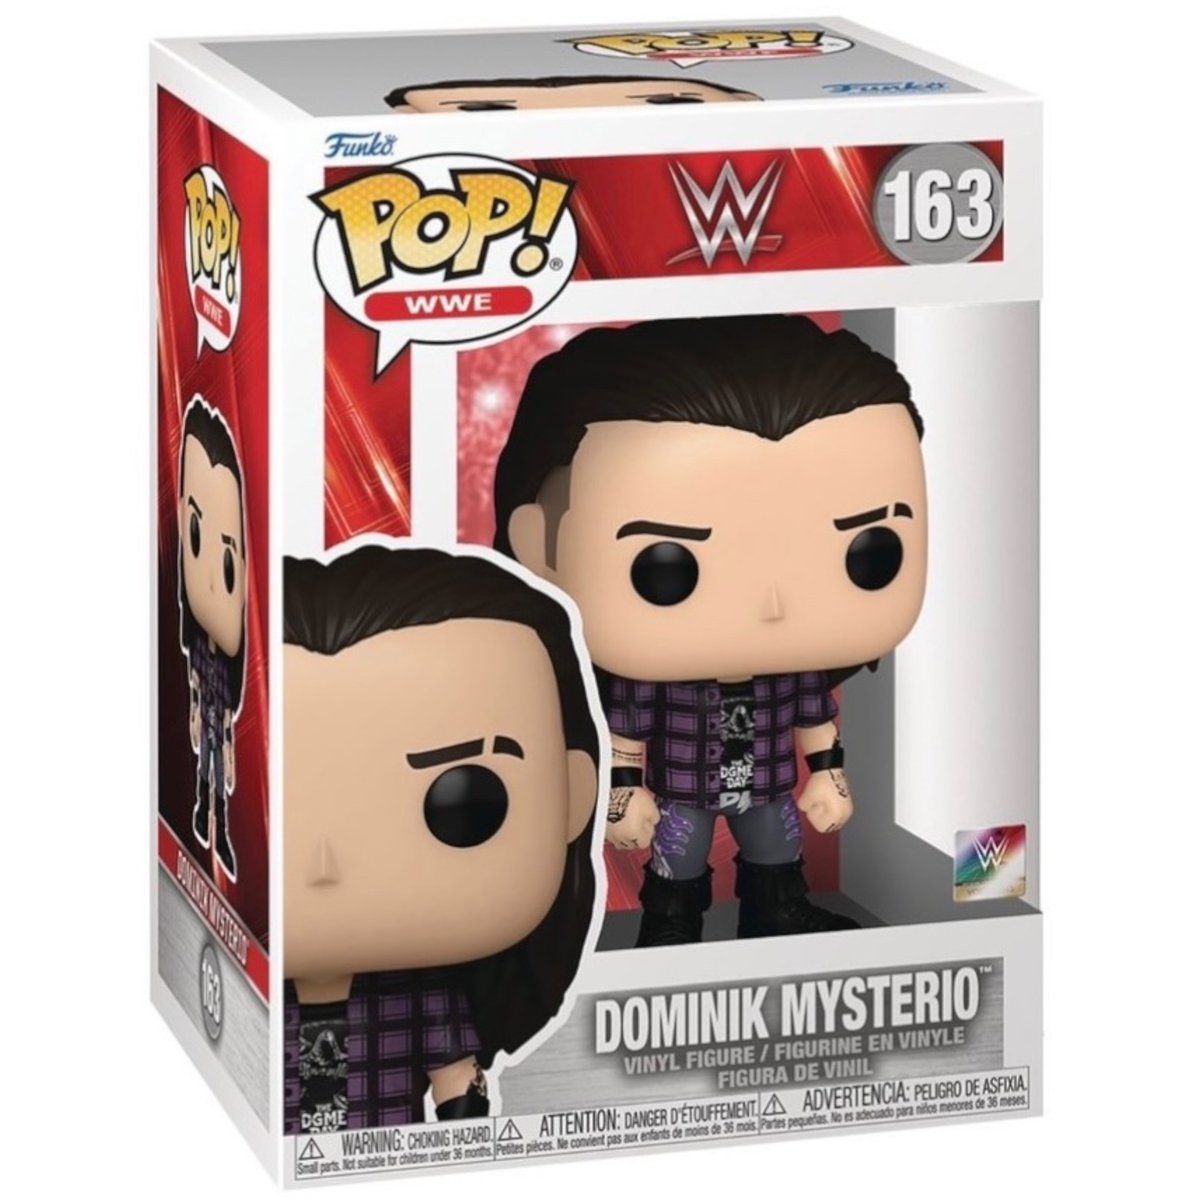 ITS HIS TIME TO HAVE A FUNKO, BBY 🔥

Pre-Order dropping THIS WEEK‼️
Available at AMAZON 

📸 Funko POP News